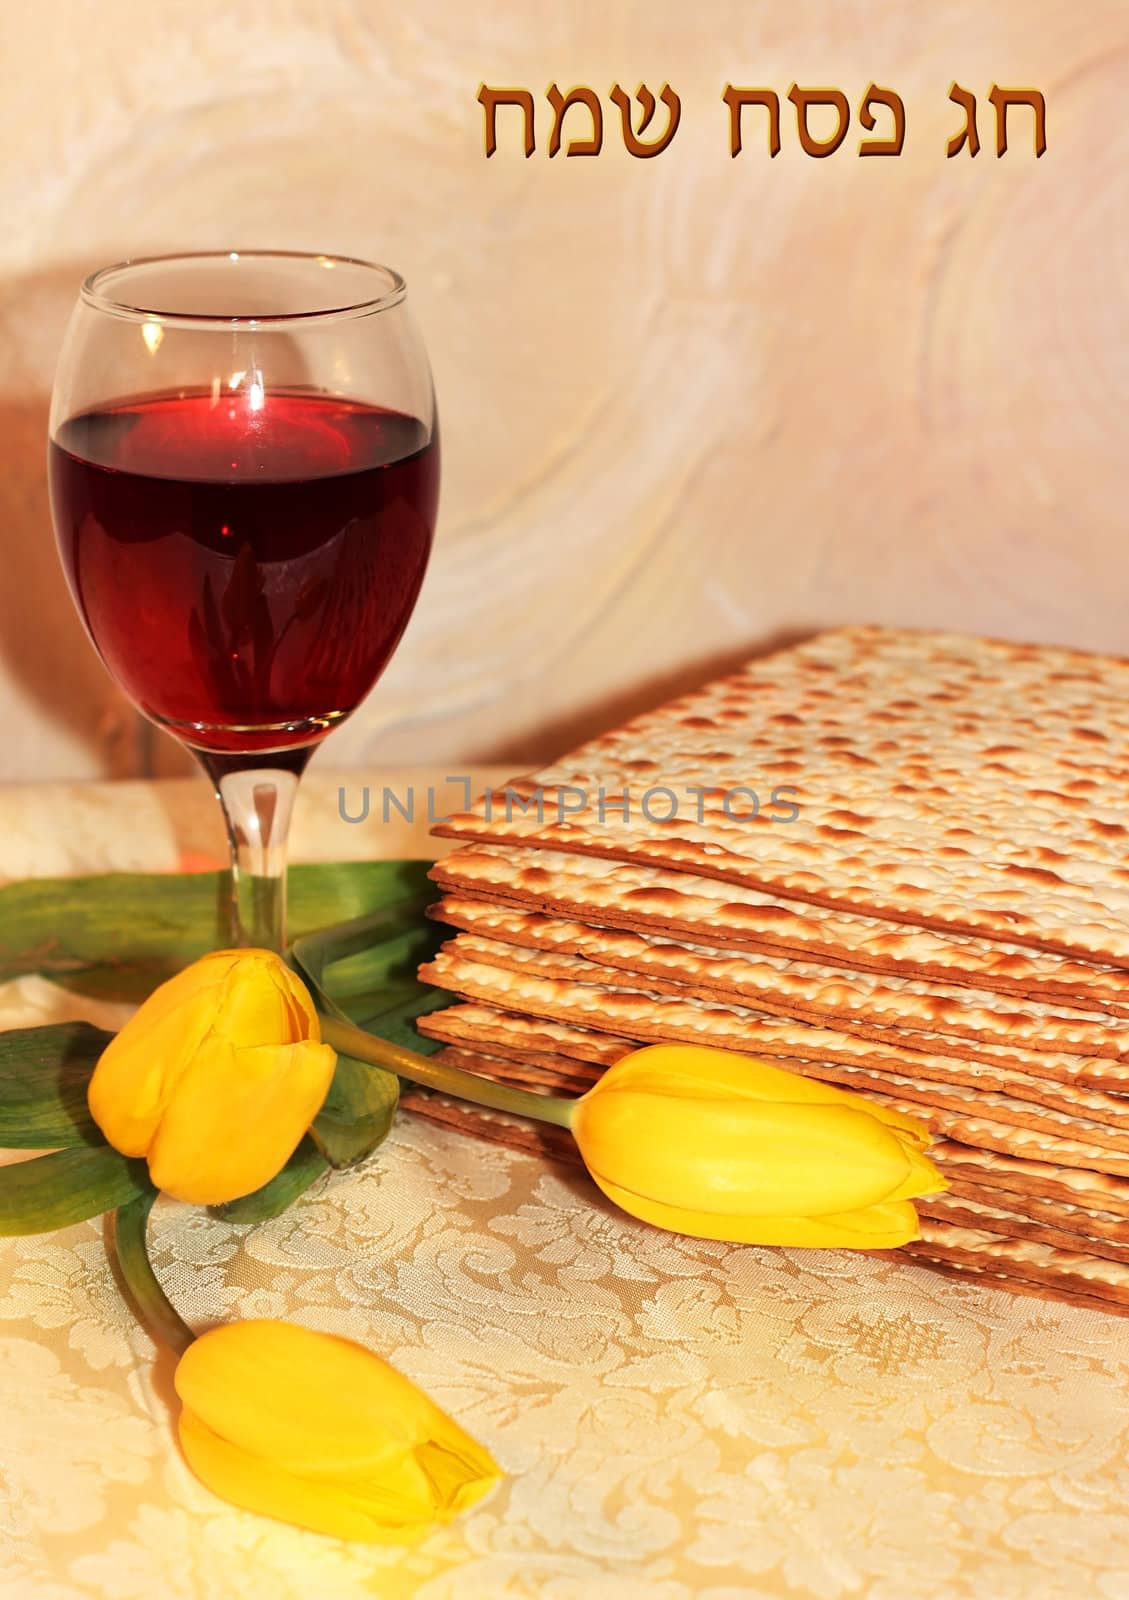 jewish holiday of Passover and its attributes, with an inscription in Hebrew - Happy Passover